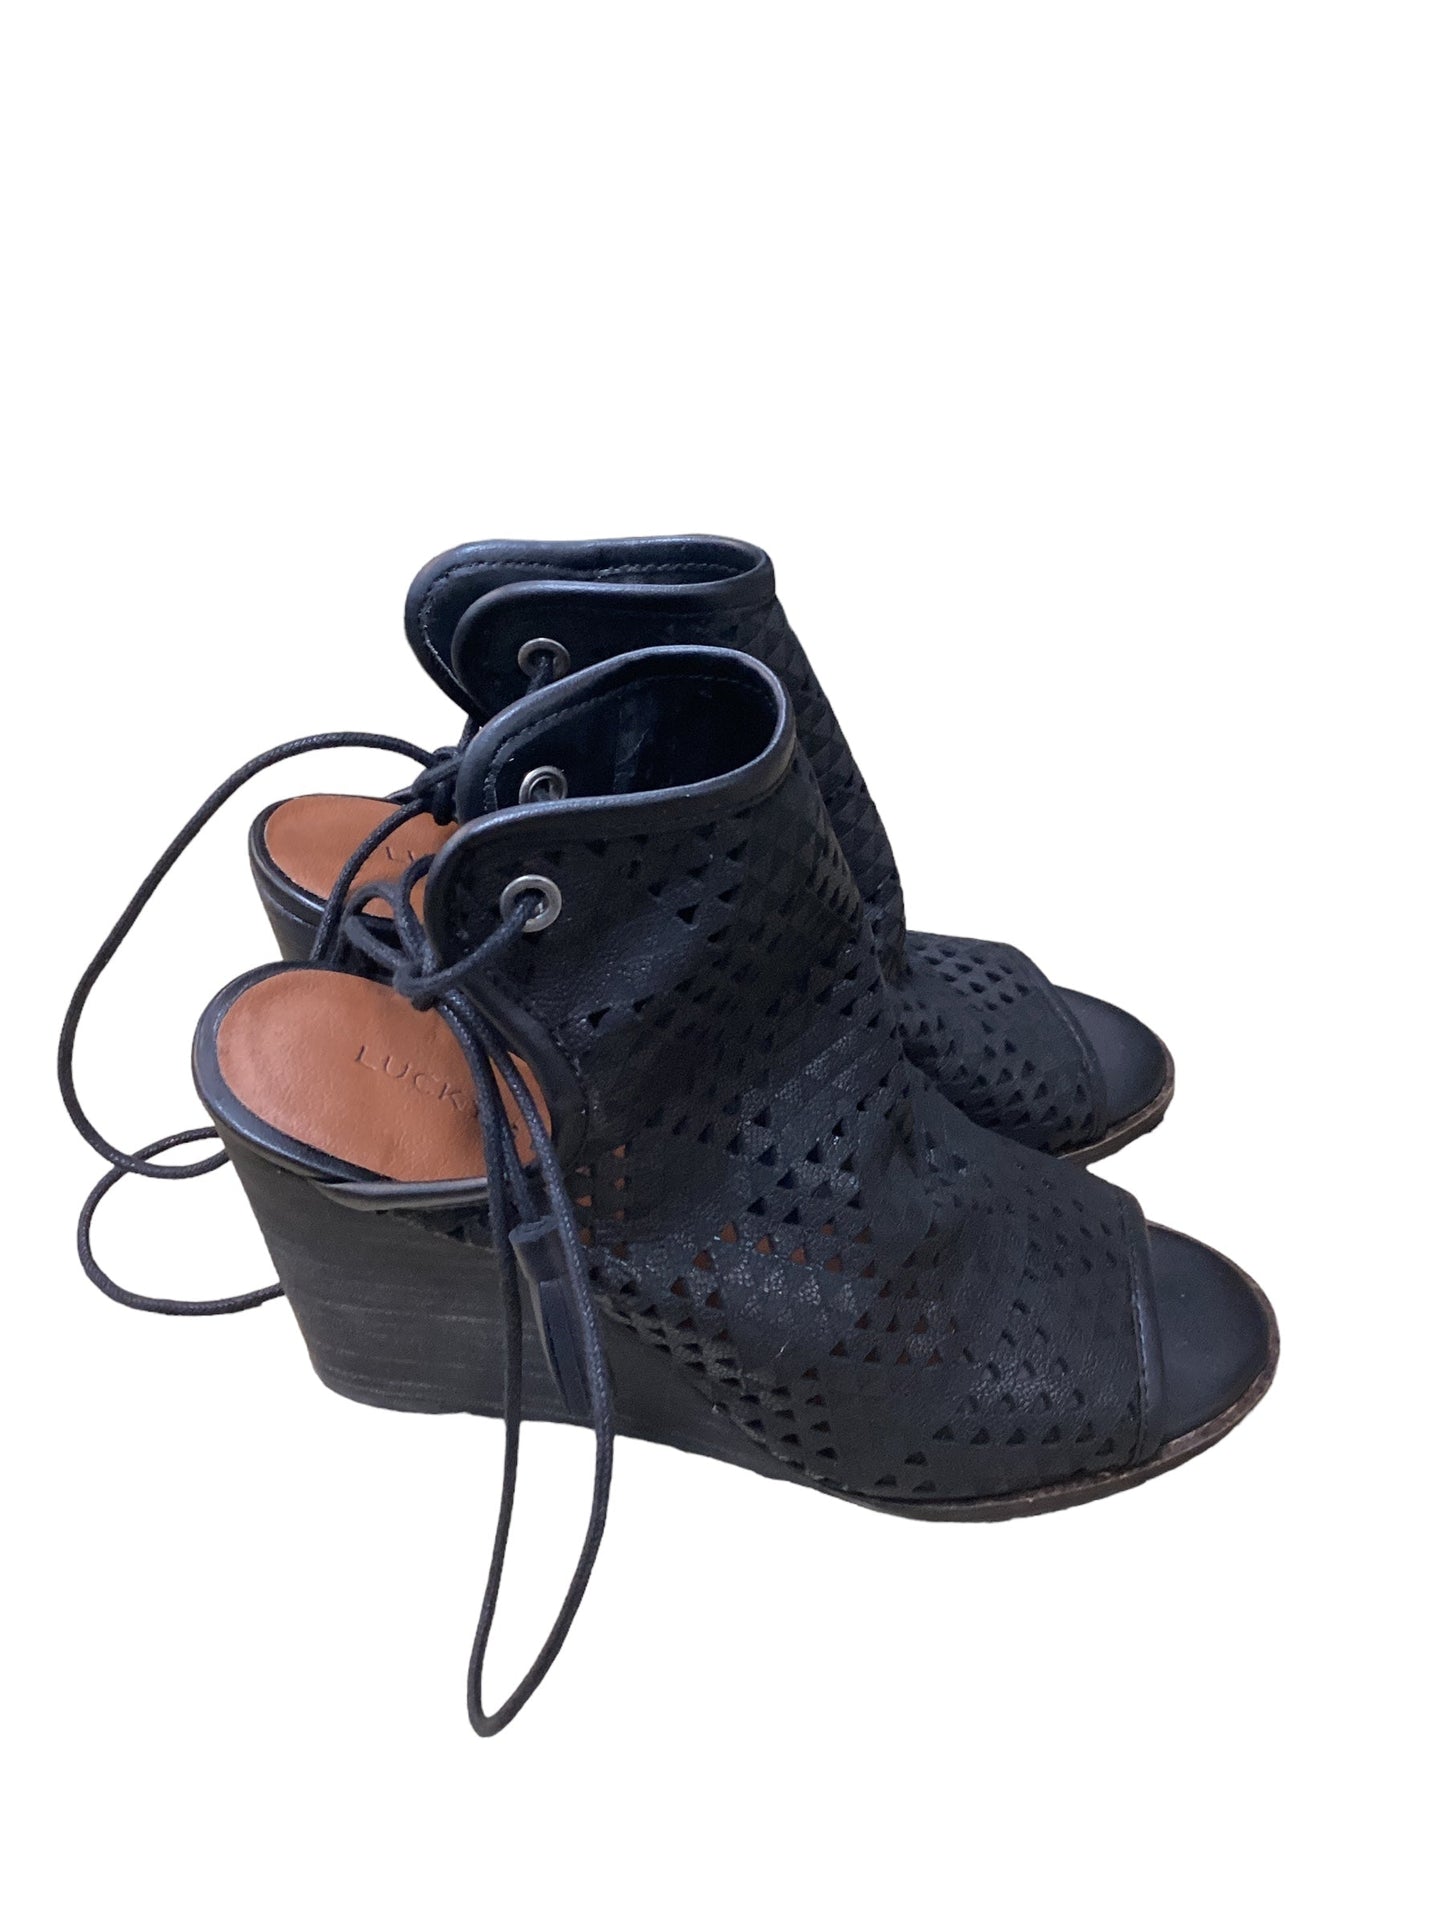 Black Shoes Heels Wedge Lucky Brand, Size 7